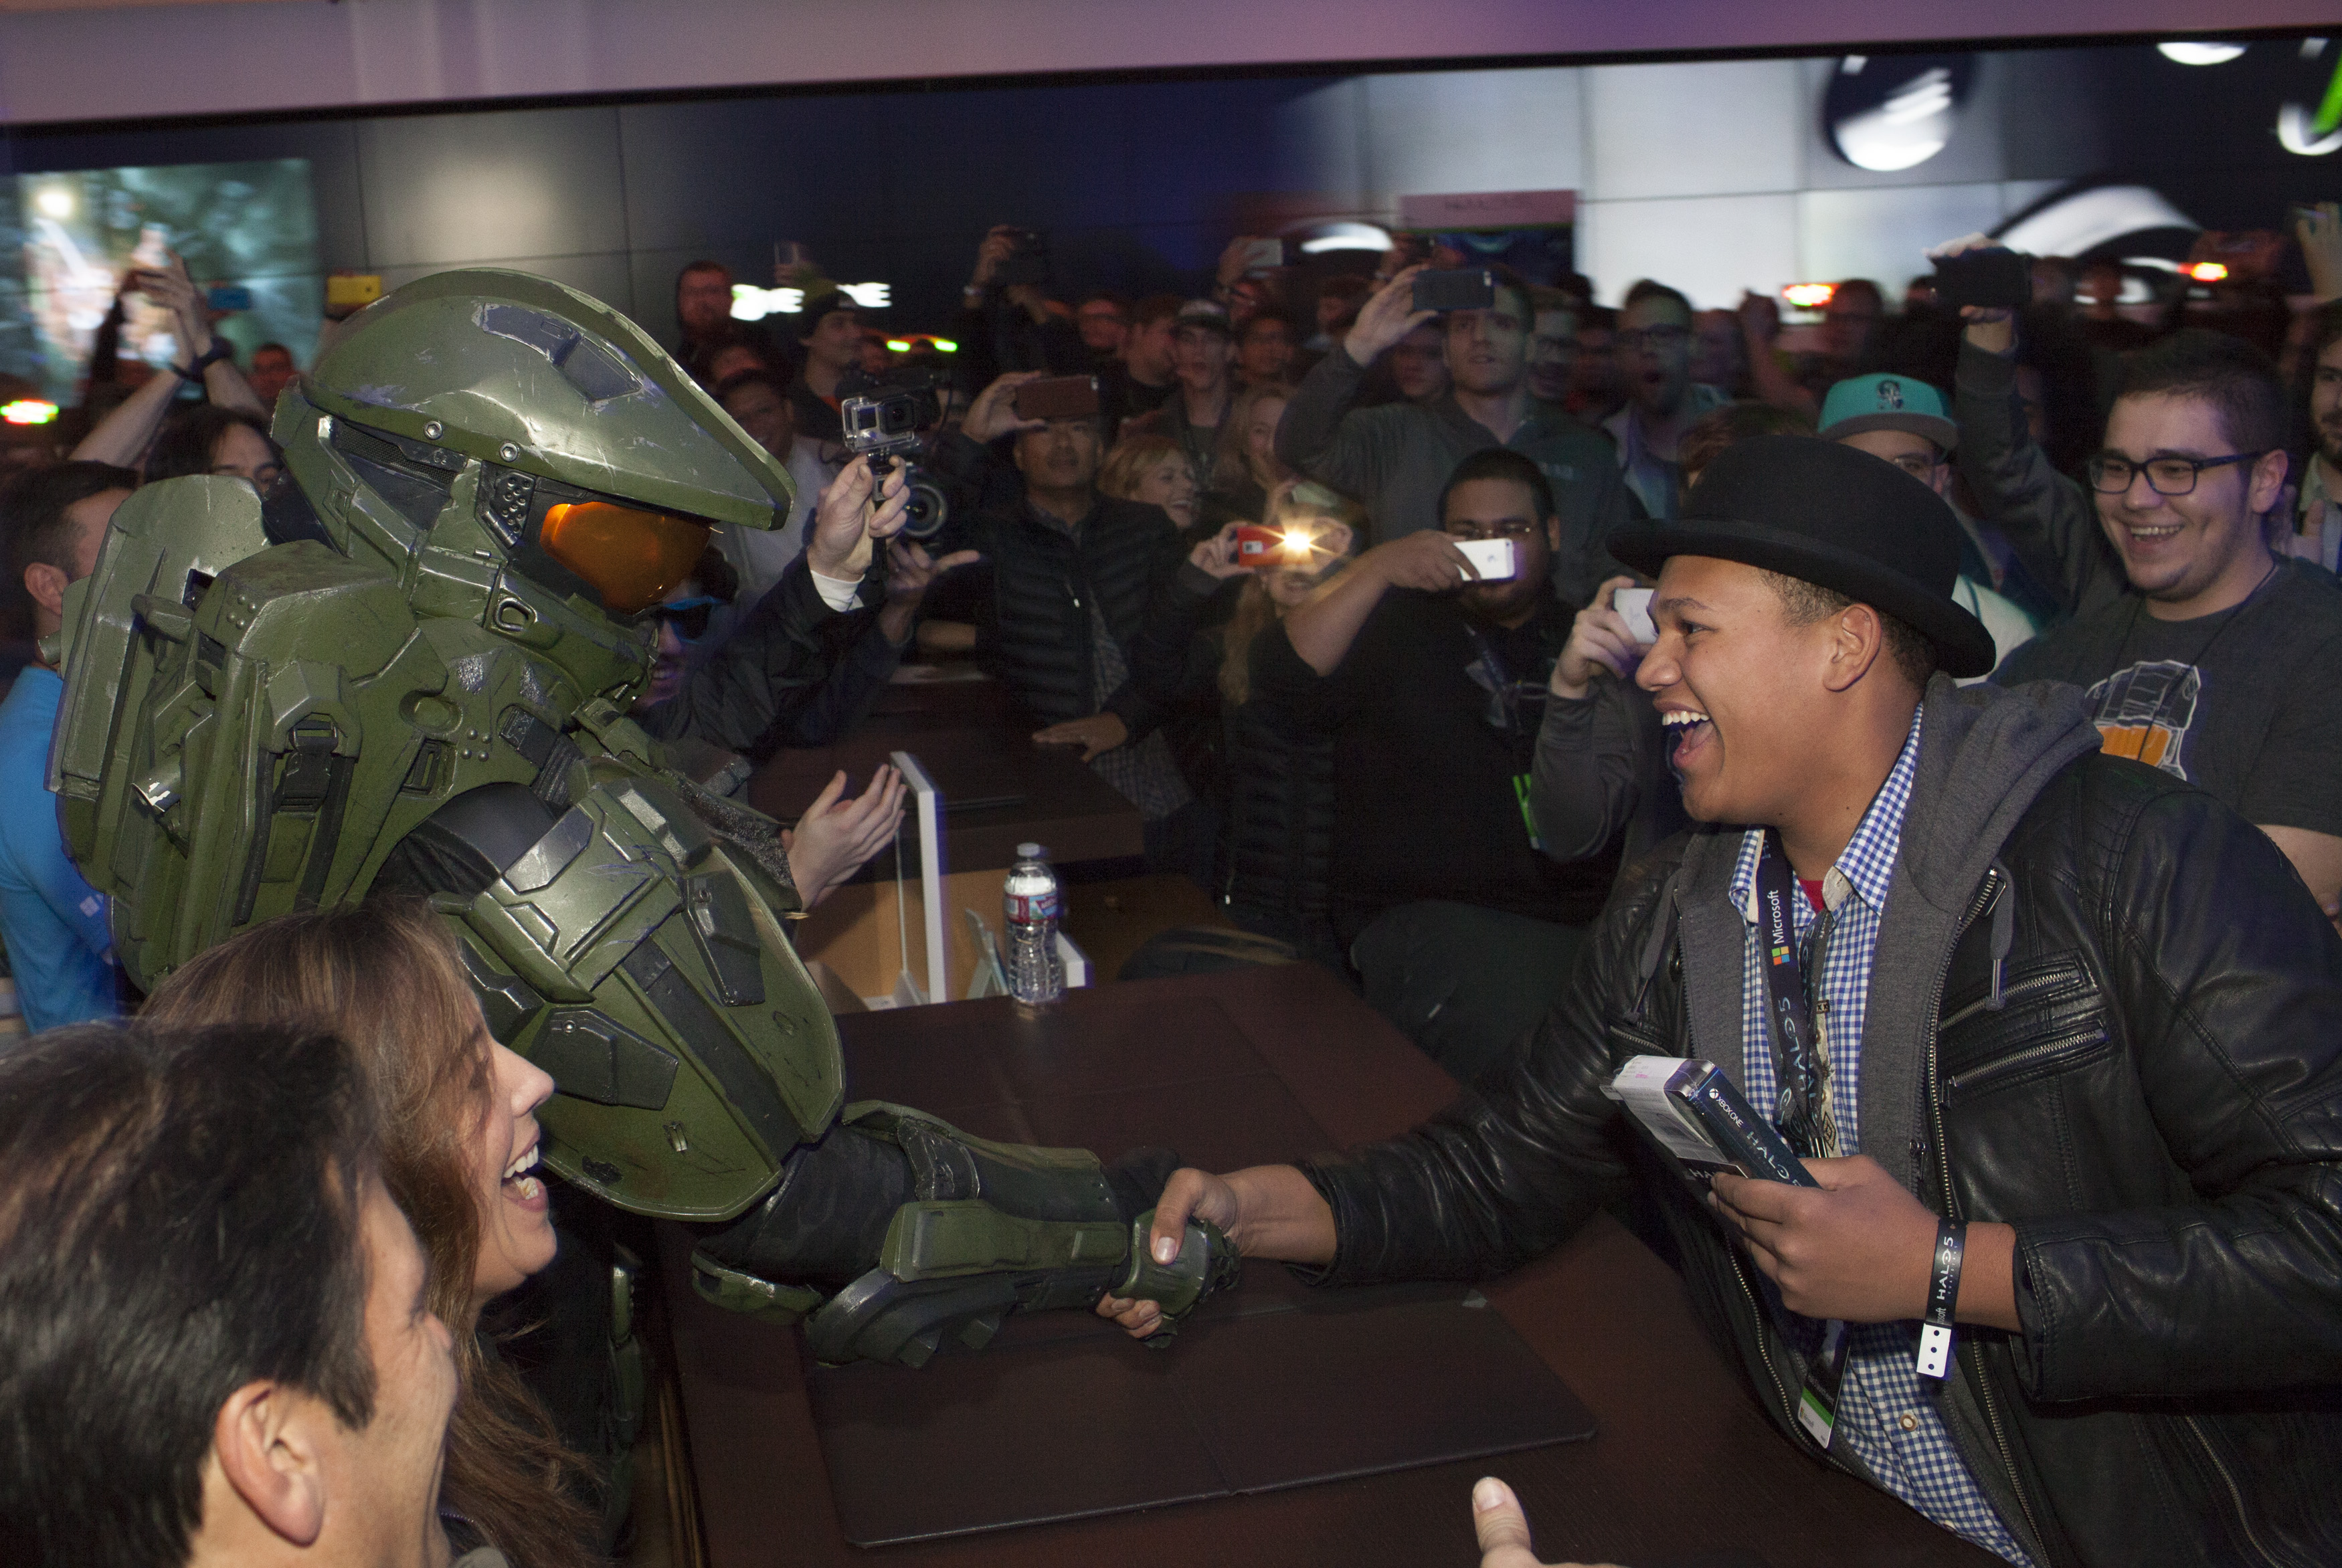 Head of Xbox Phil Spencer, Head of 343 Industries Bonnie Ross and the Master Chief deliver the first copy of “Halo 5: Guardians” at the Microsoft store in University Village in Seattle on Monday, Oct. 26, 2015 (Photo by Stephen Brashear/Invision for Microsoft/AP Images)